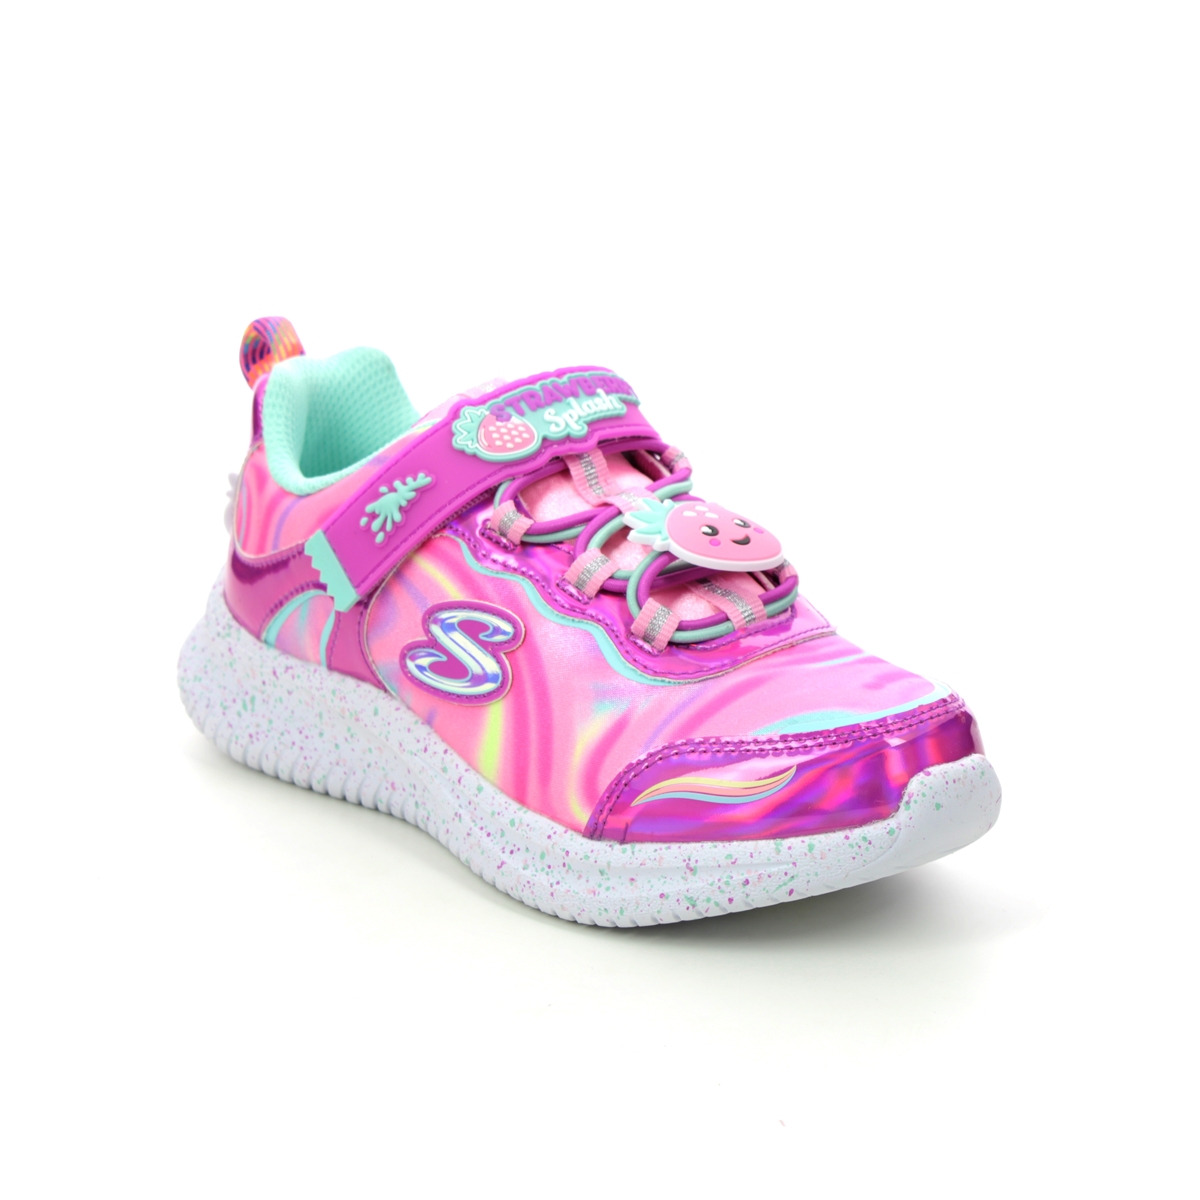 Skechers Jumpsters Sweet Pink Kids Girls Trainers 302215L In Size 24 In Plain Pink For kids